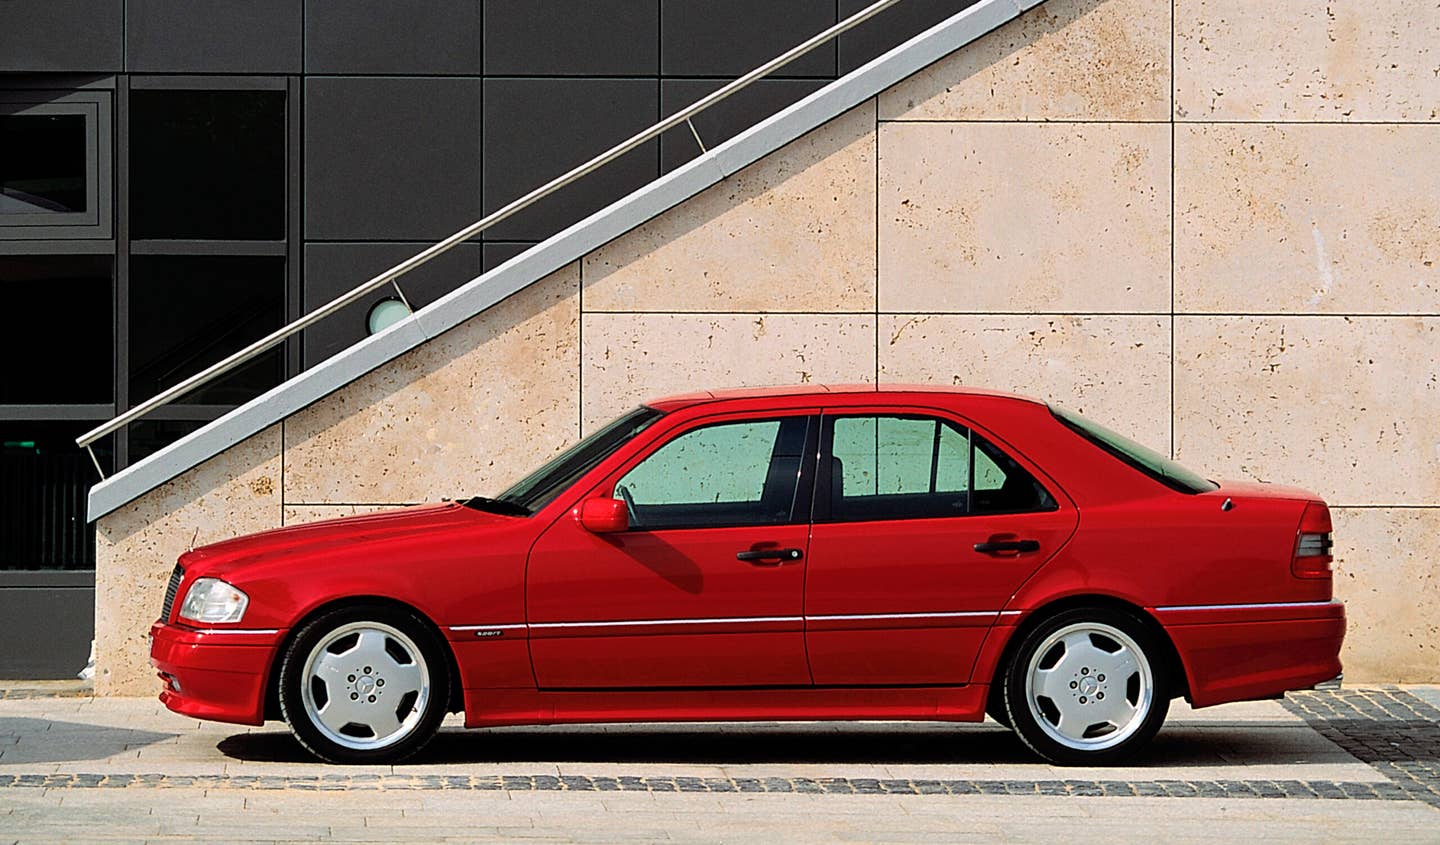 Mercedes-Benz C 36 AMG from model series 202, production period 1993 to 1997. Exterior shot of the driver's side. Photo from 1993.